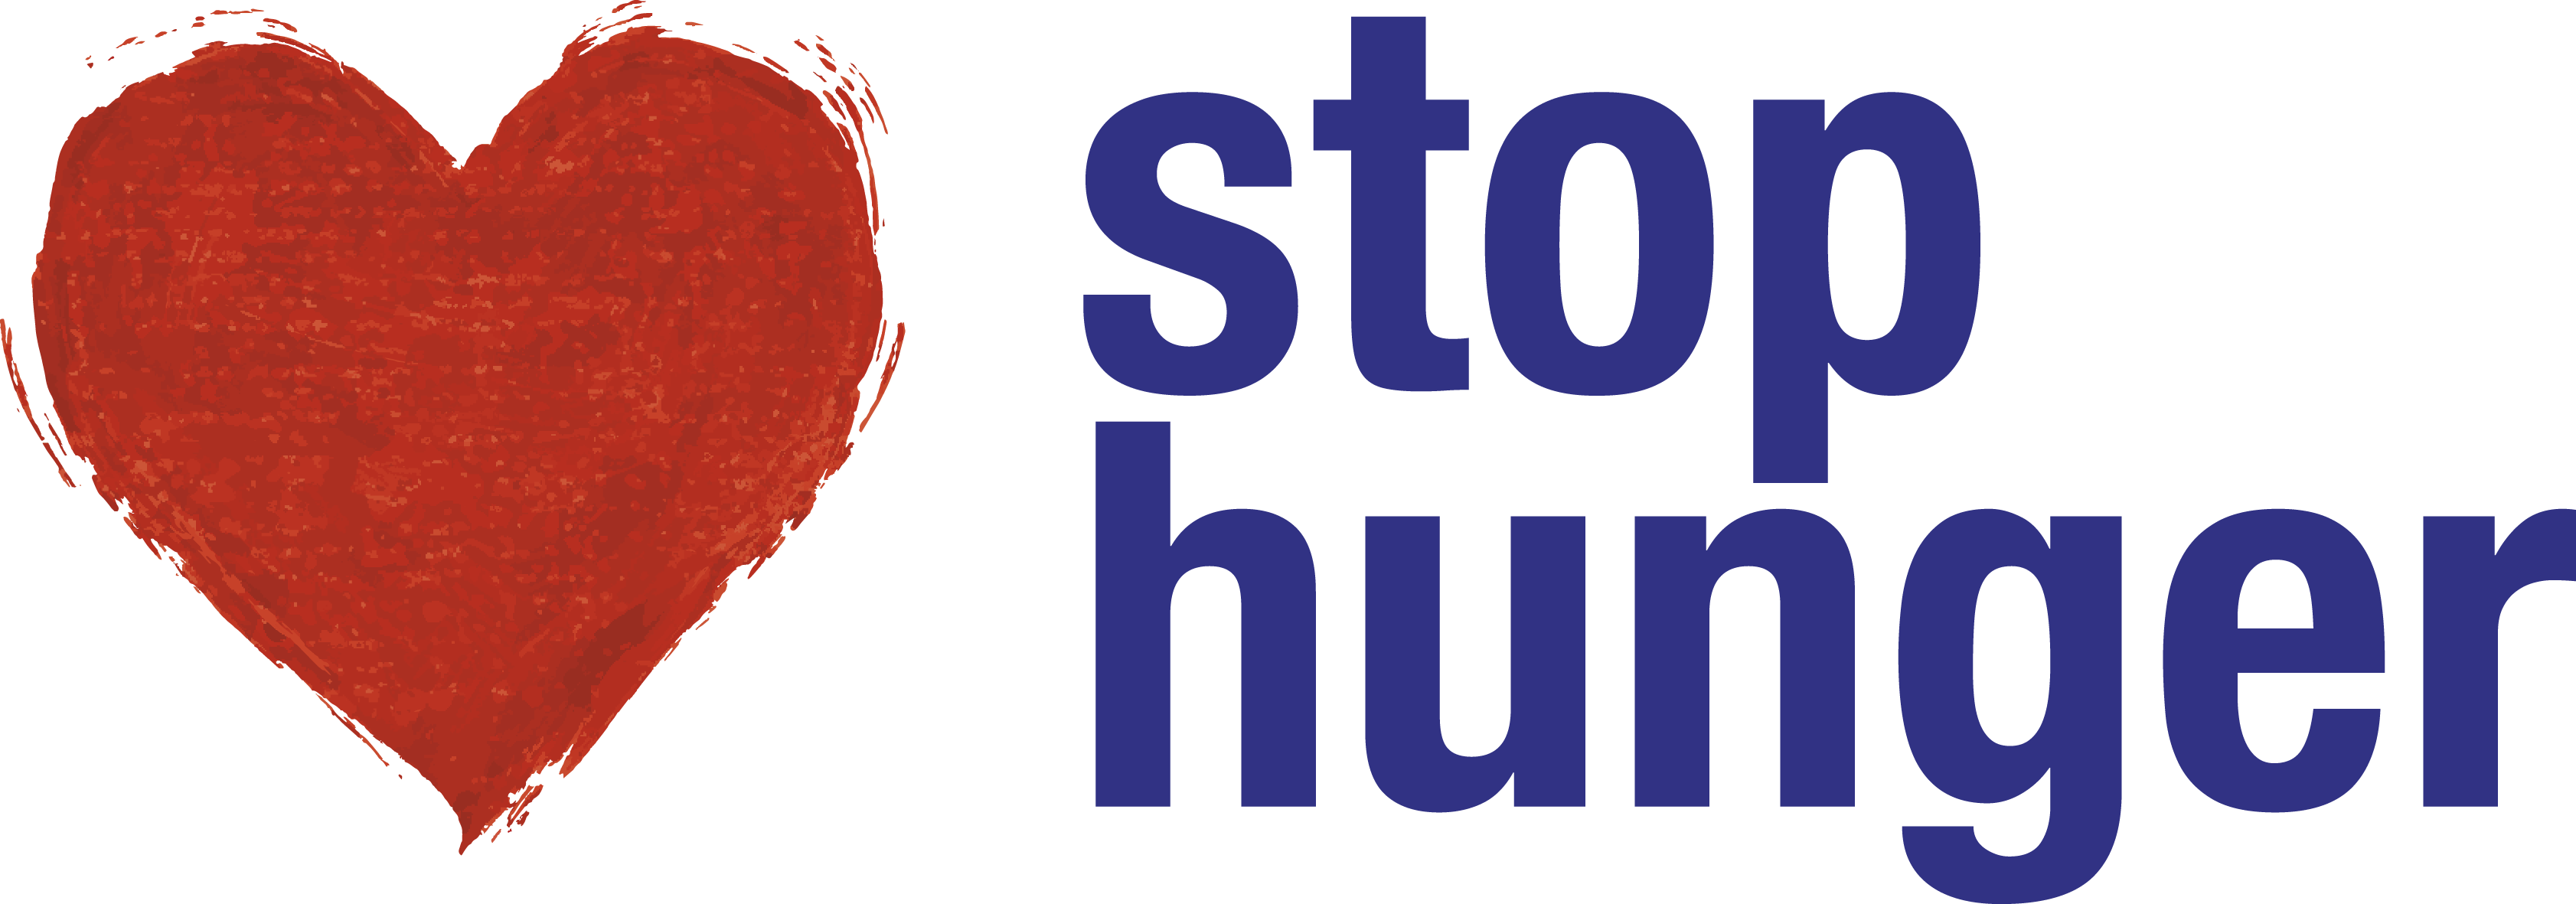 STOPHUNGER-logo2014.png